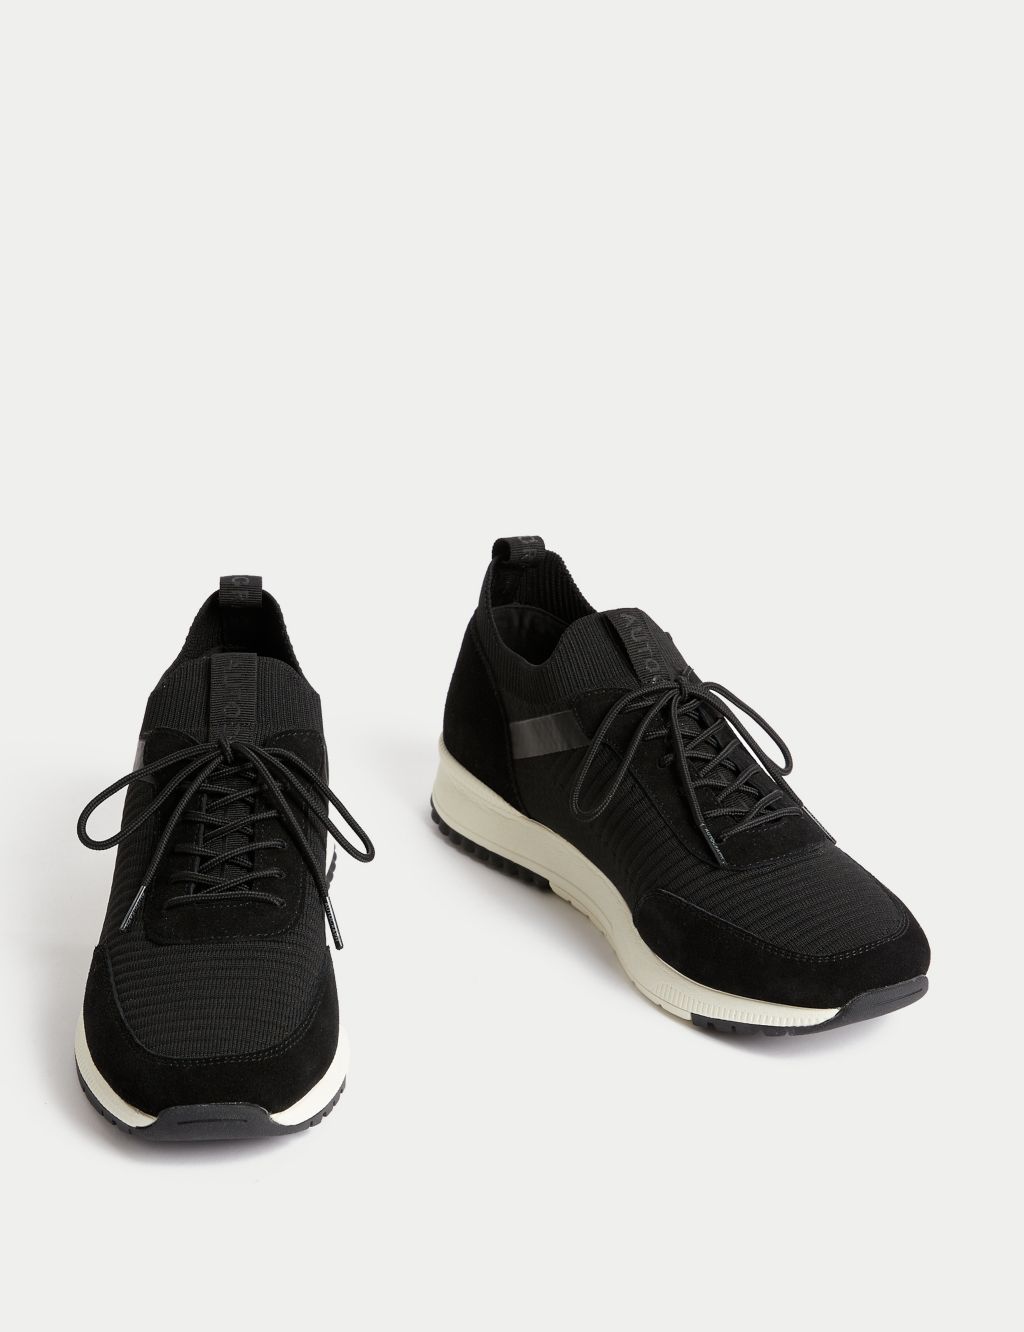 Leather Knitted Lace Up Trainers image 2